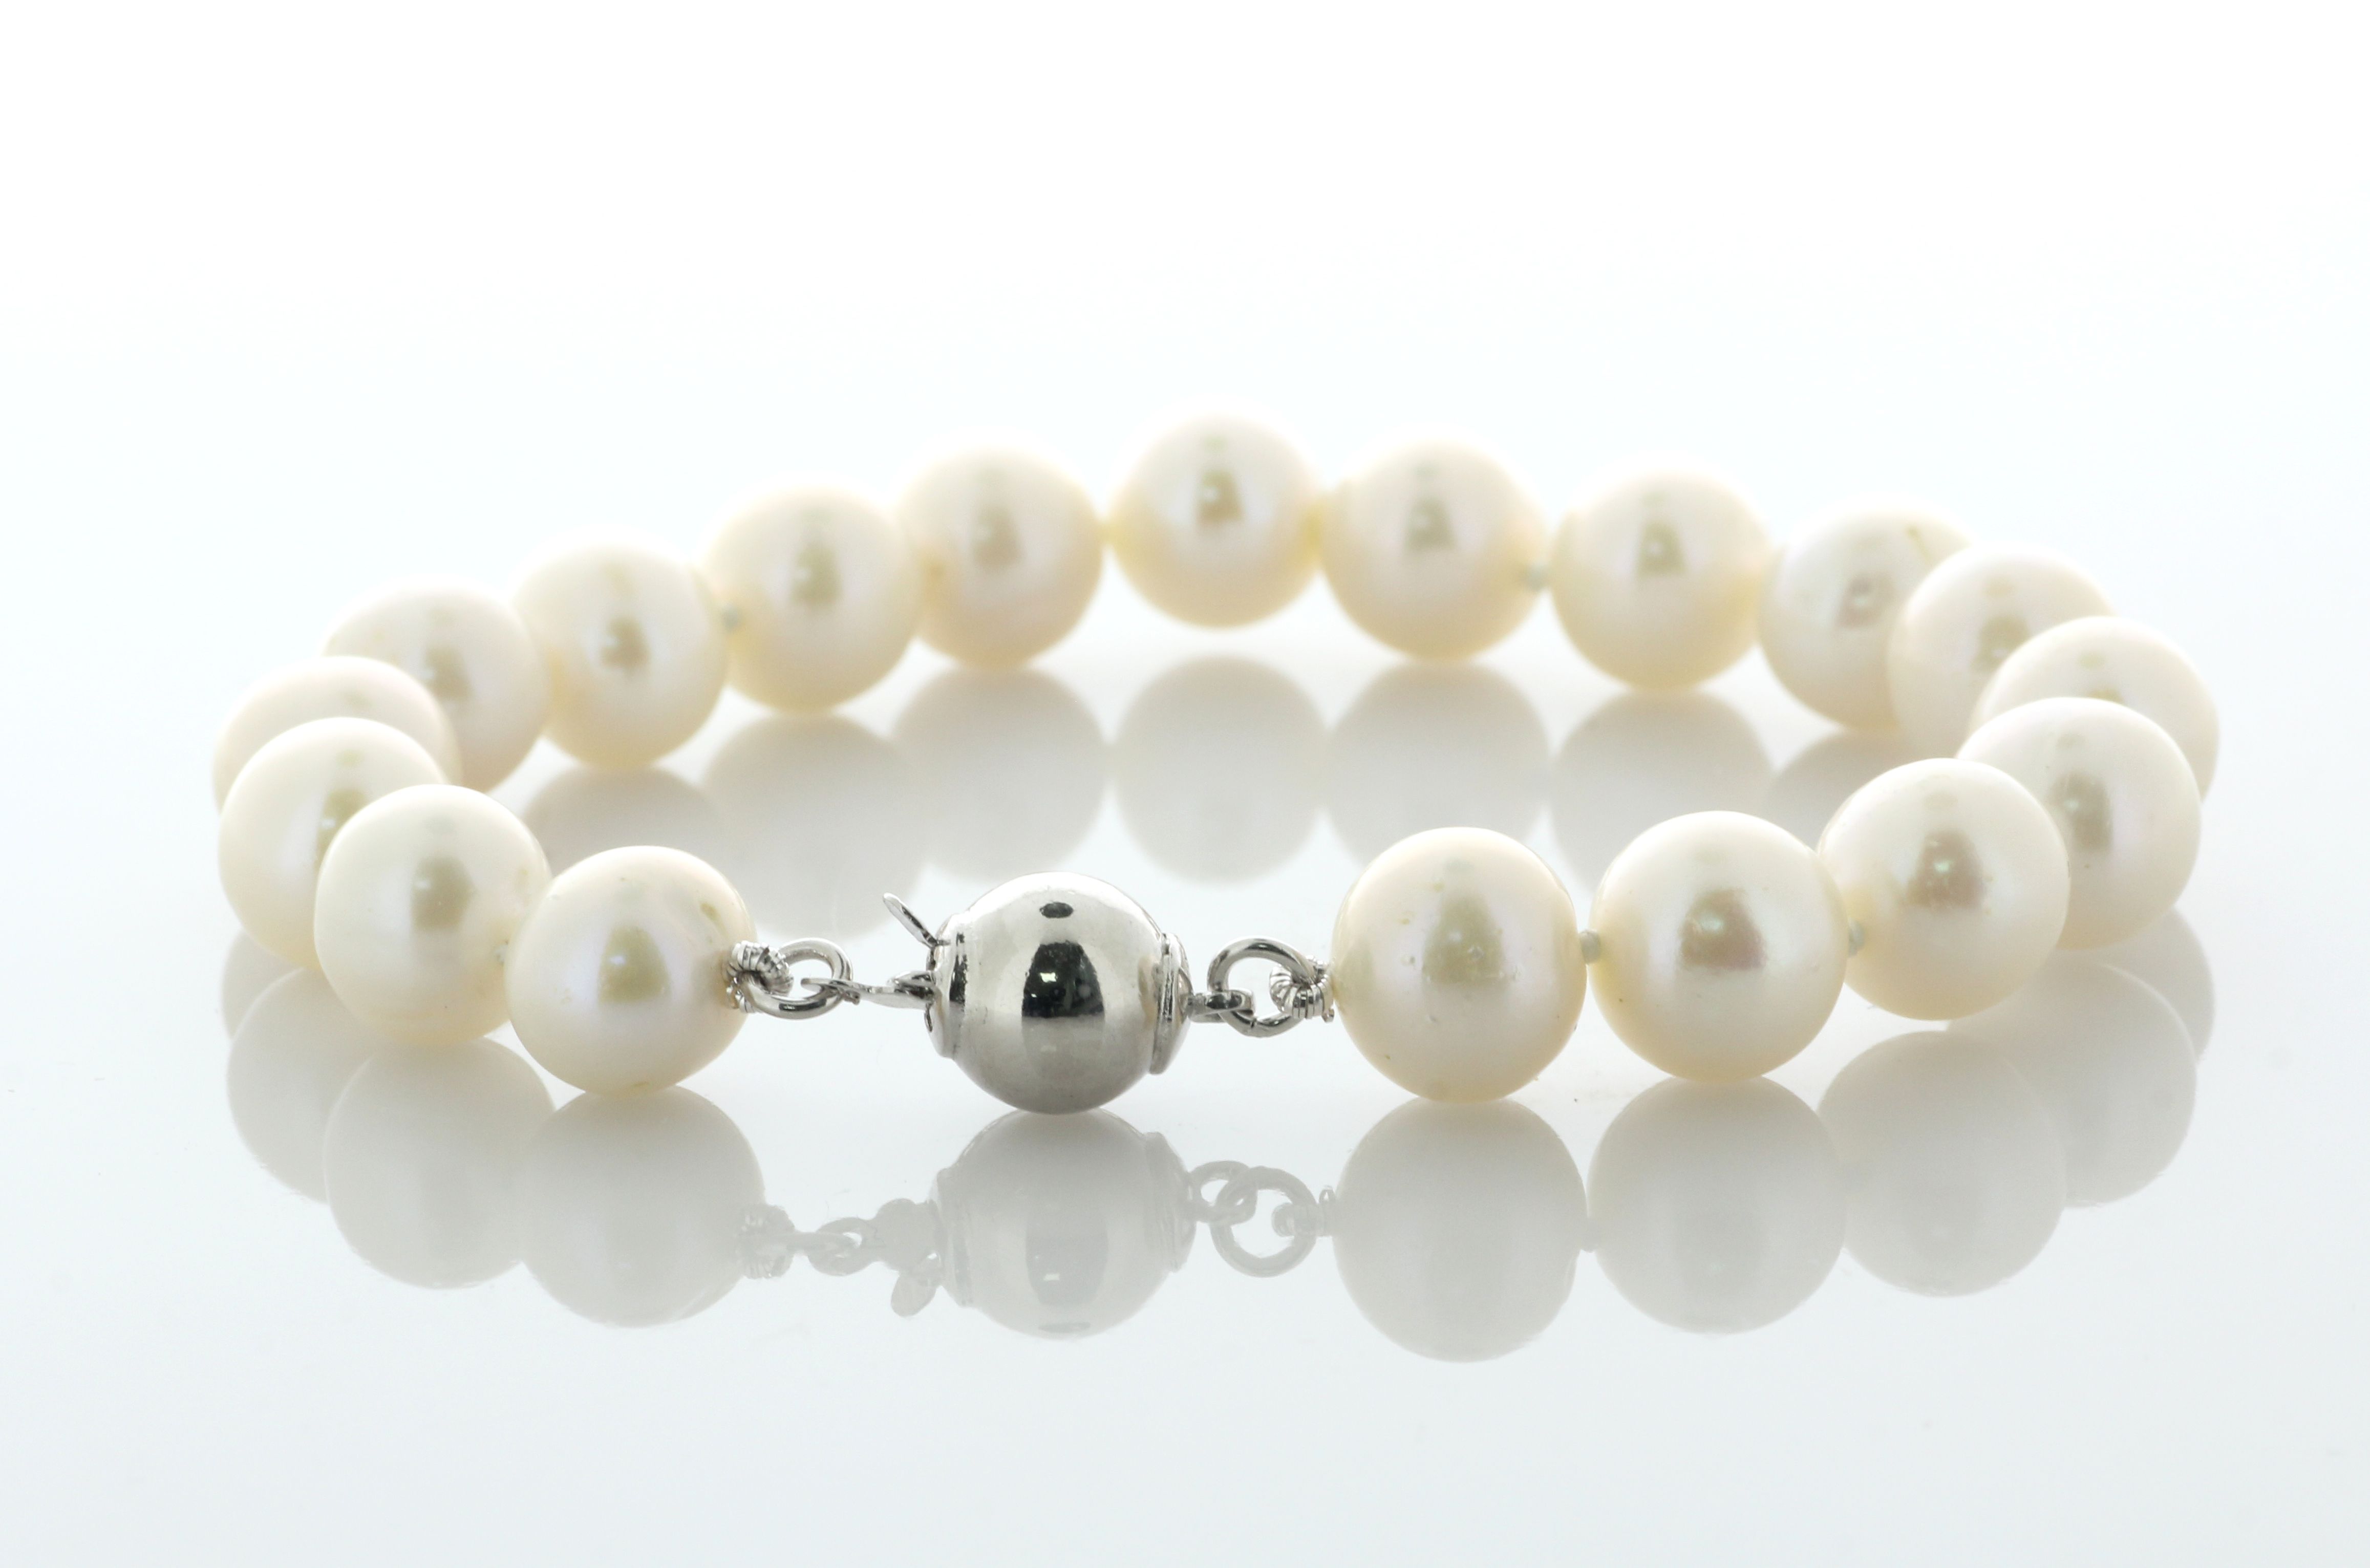 6.5 Inches Freshwater Cultured 8.5 - 9.0mm Pearl Bracelet With Silver Clasp - Image 2 of 4